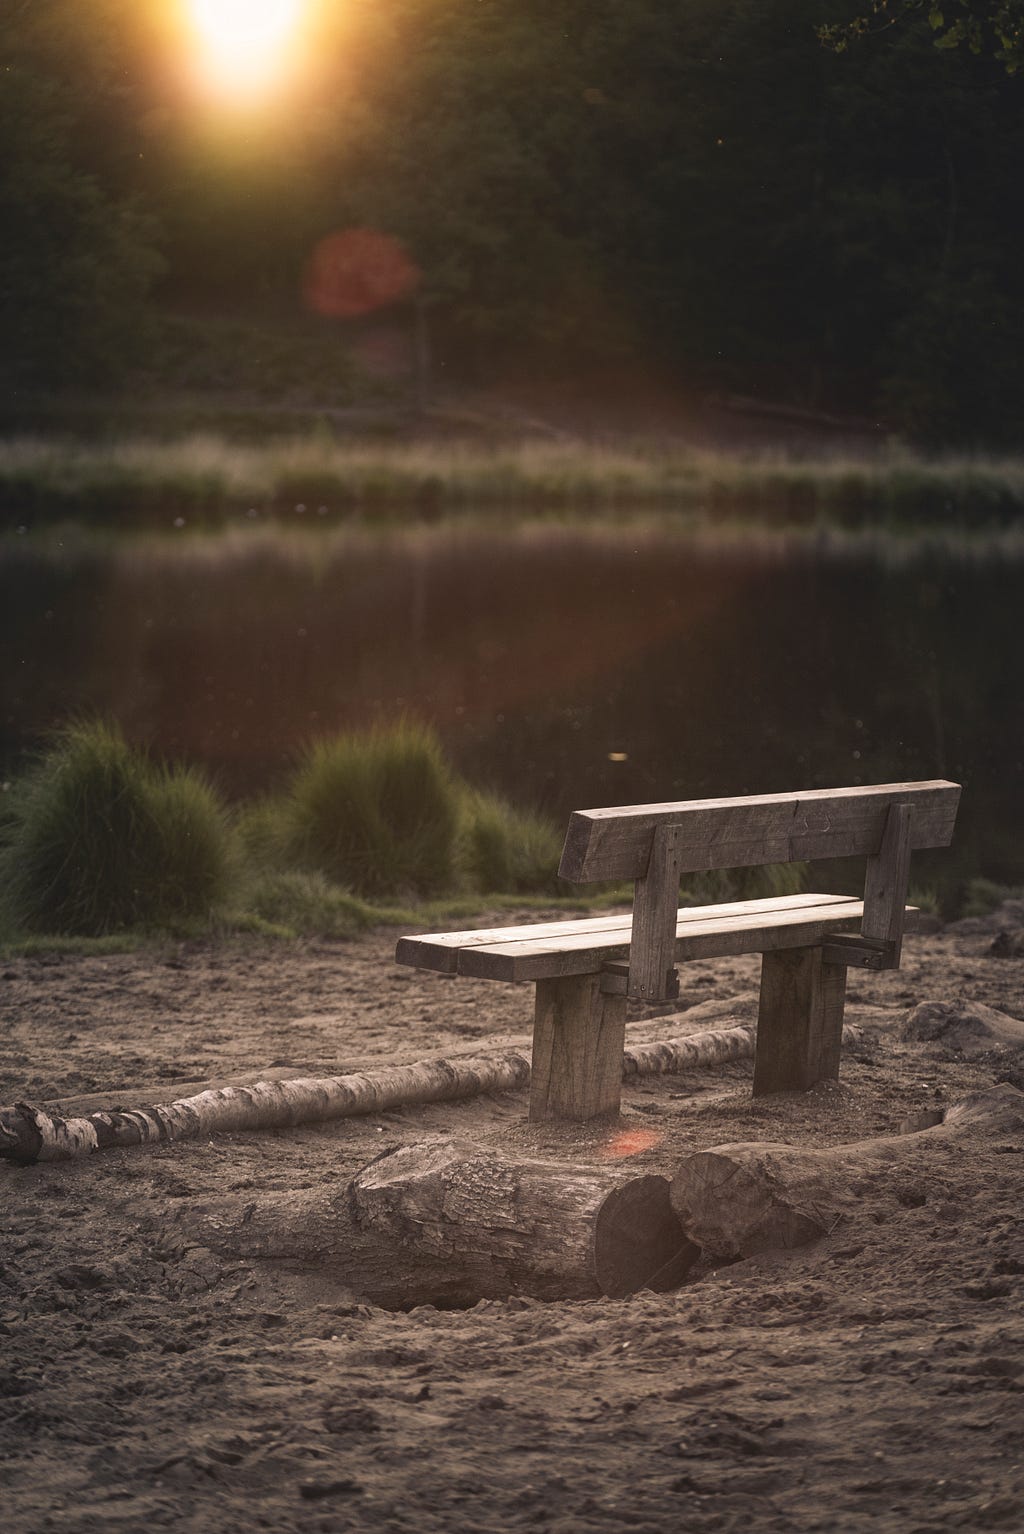 A lonely wooden bench near the edge of a lake.